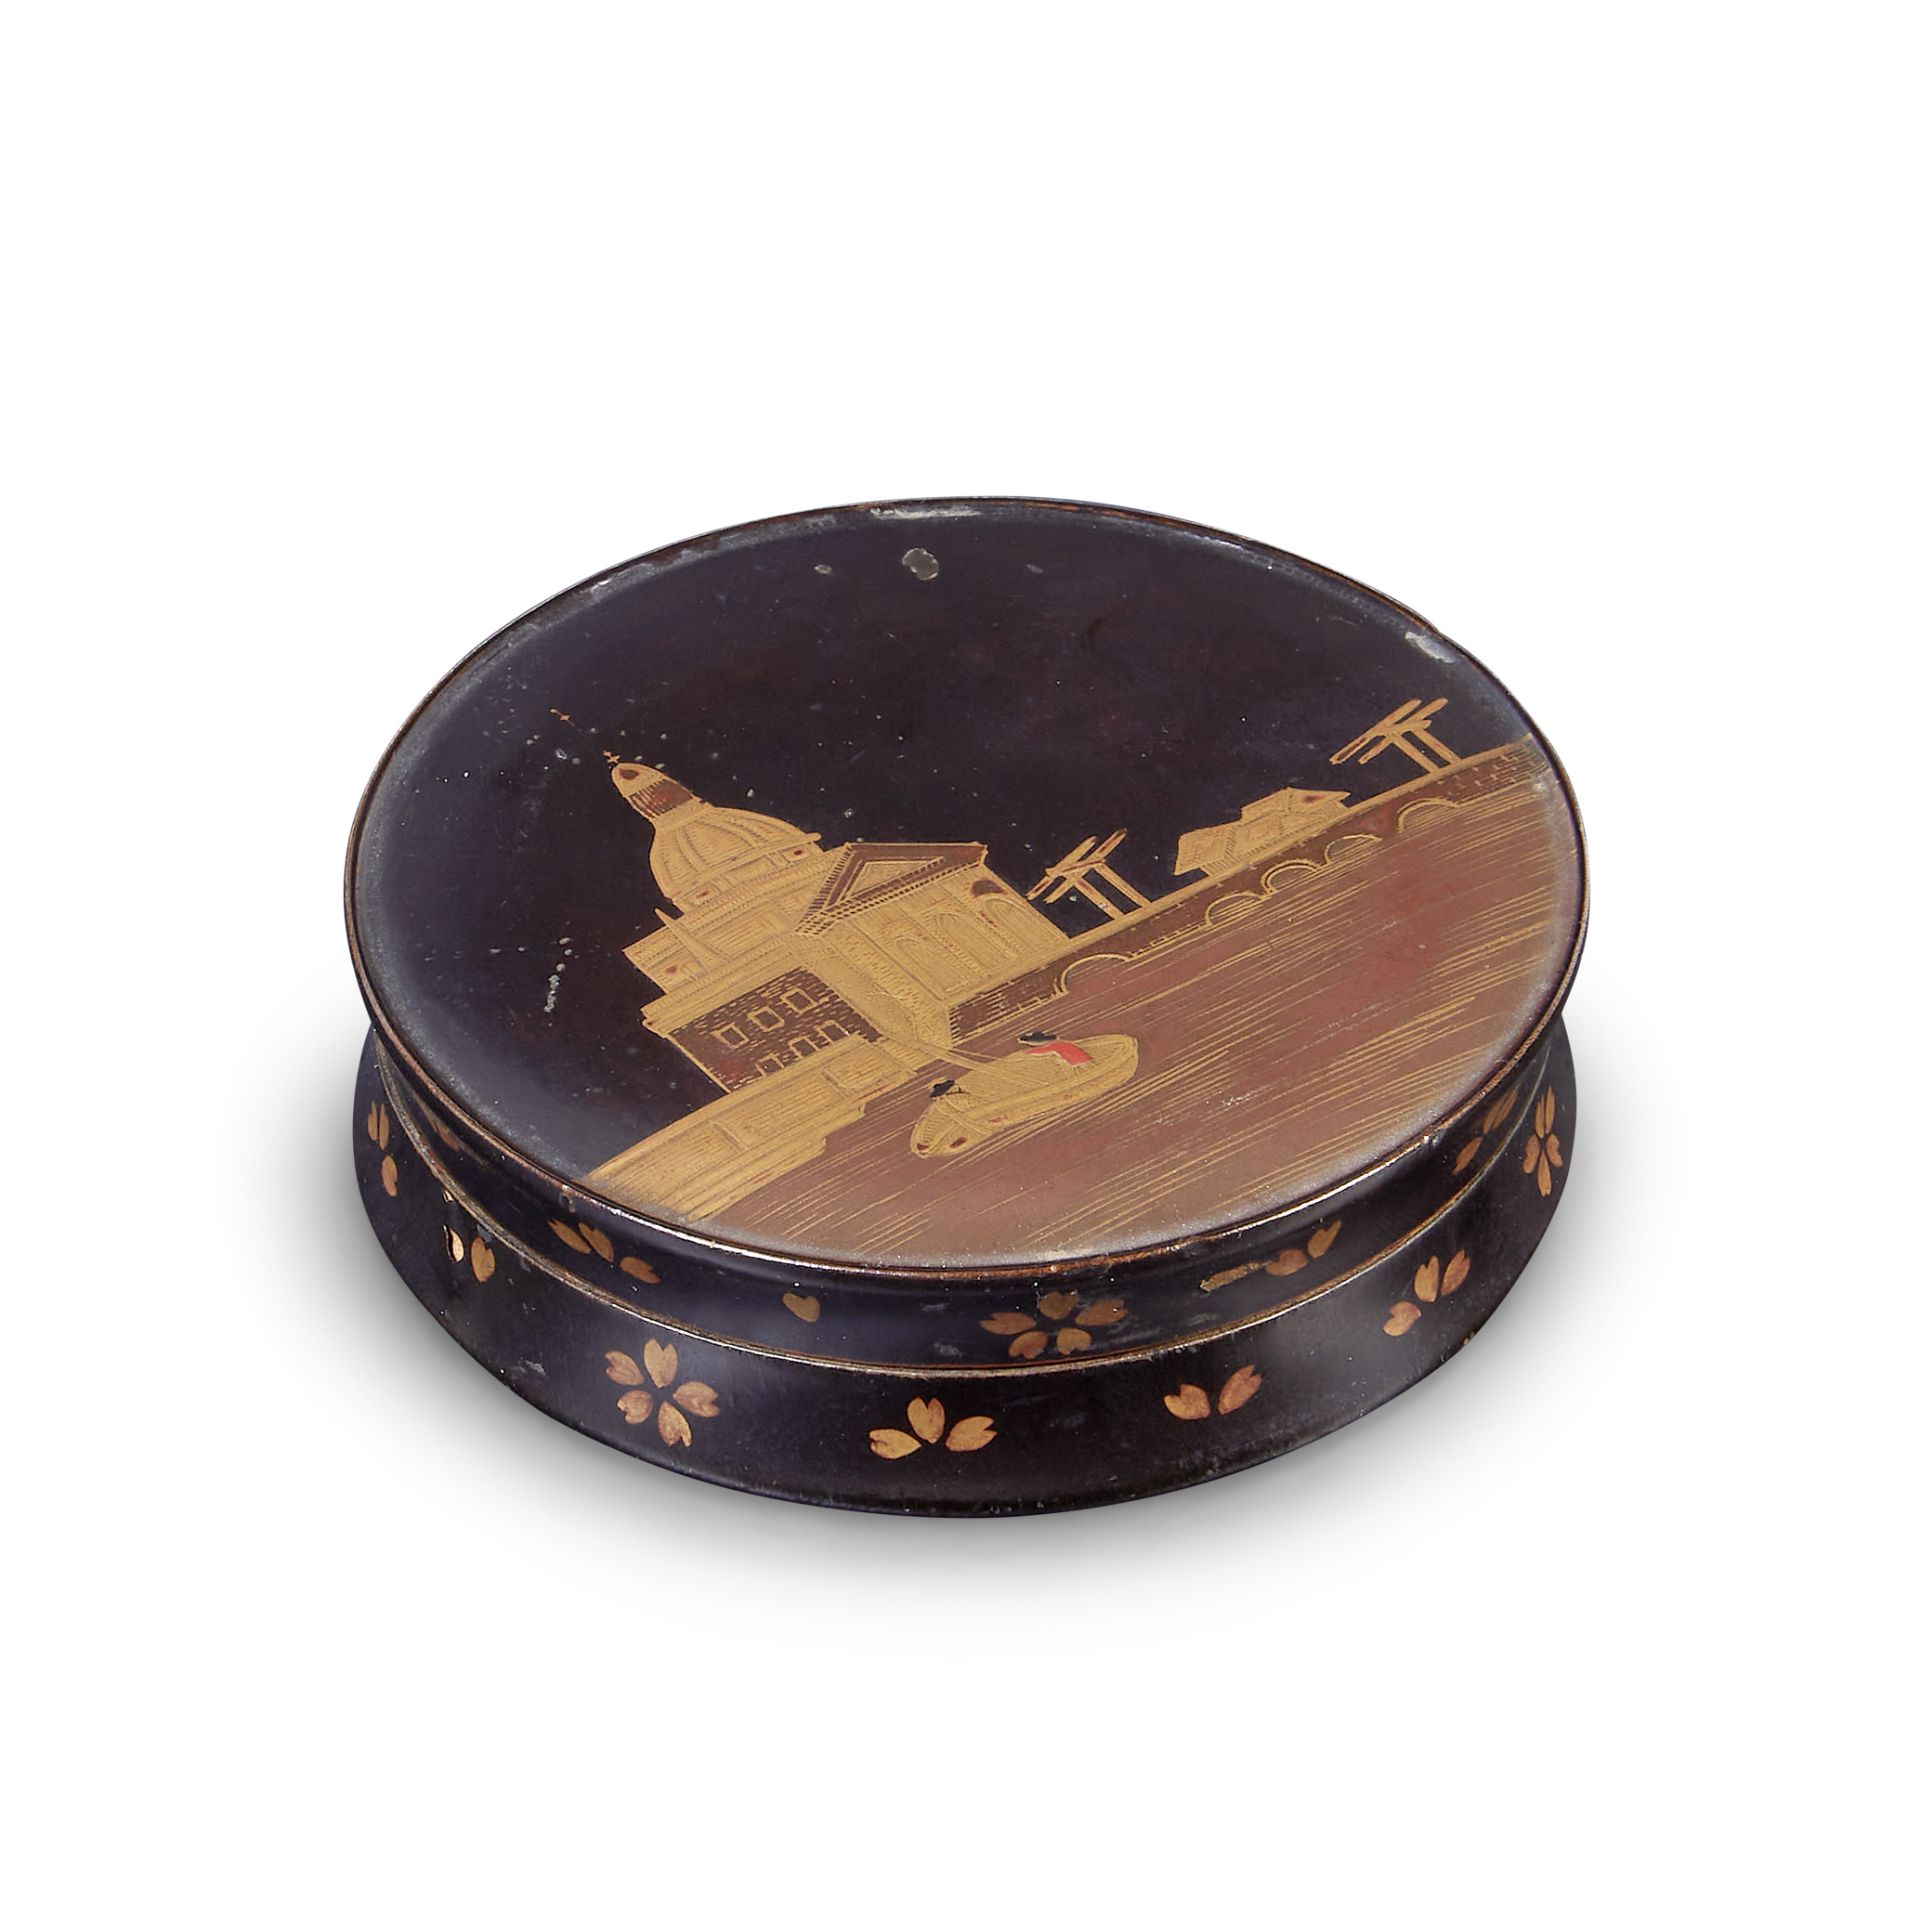 A rare early 19th century Japanese lacquered snuff box of Dutch topographical interest